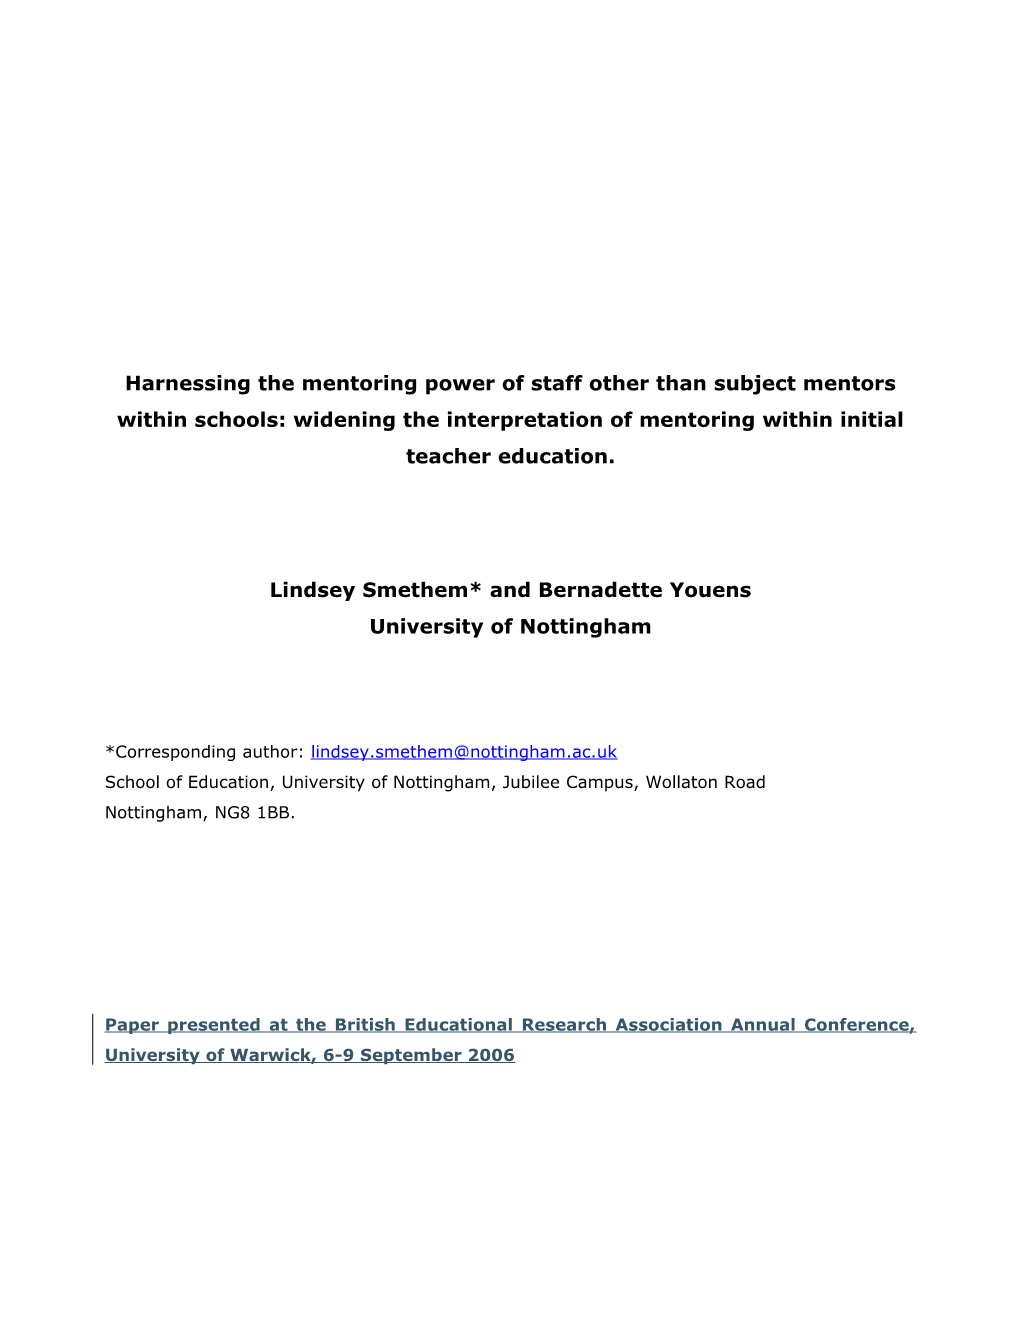 Harnessing the Mentoring Power of Staff Other Than Subject Mentors Within Schools: Widening